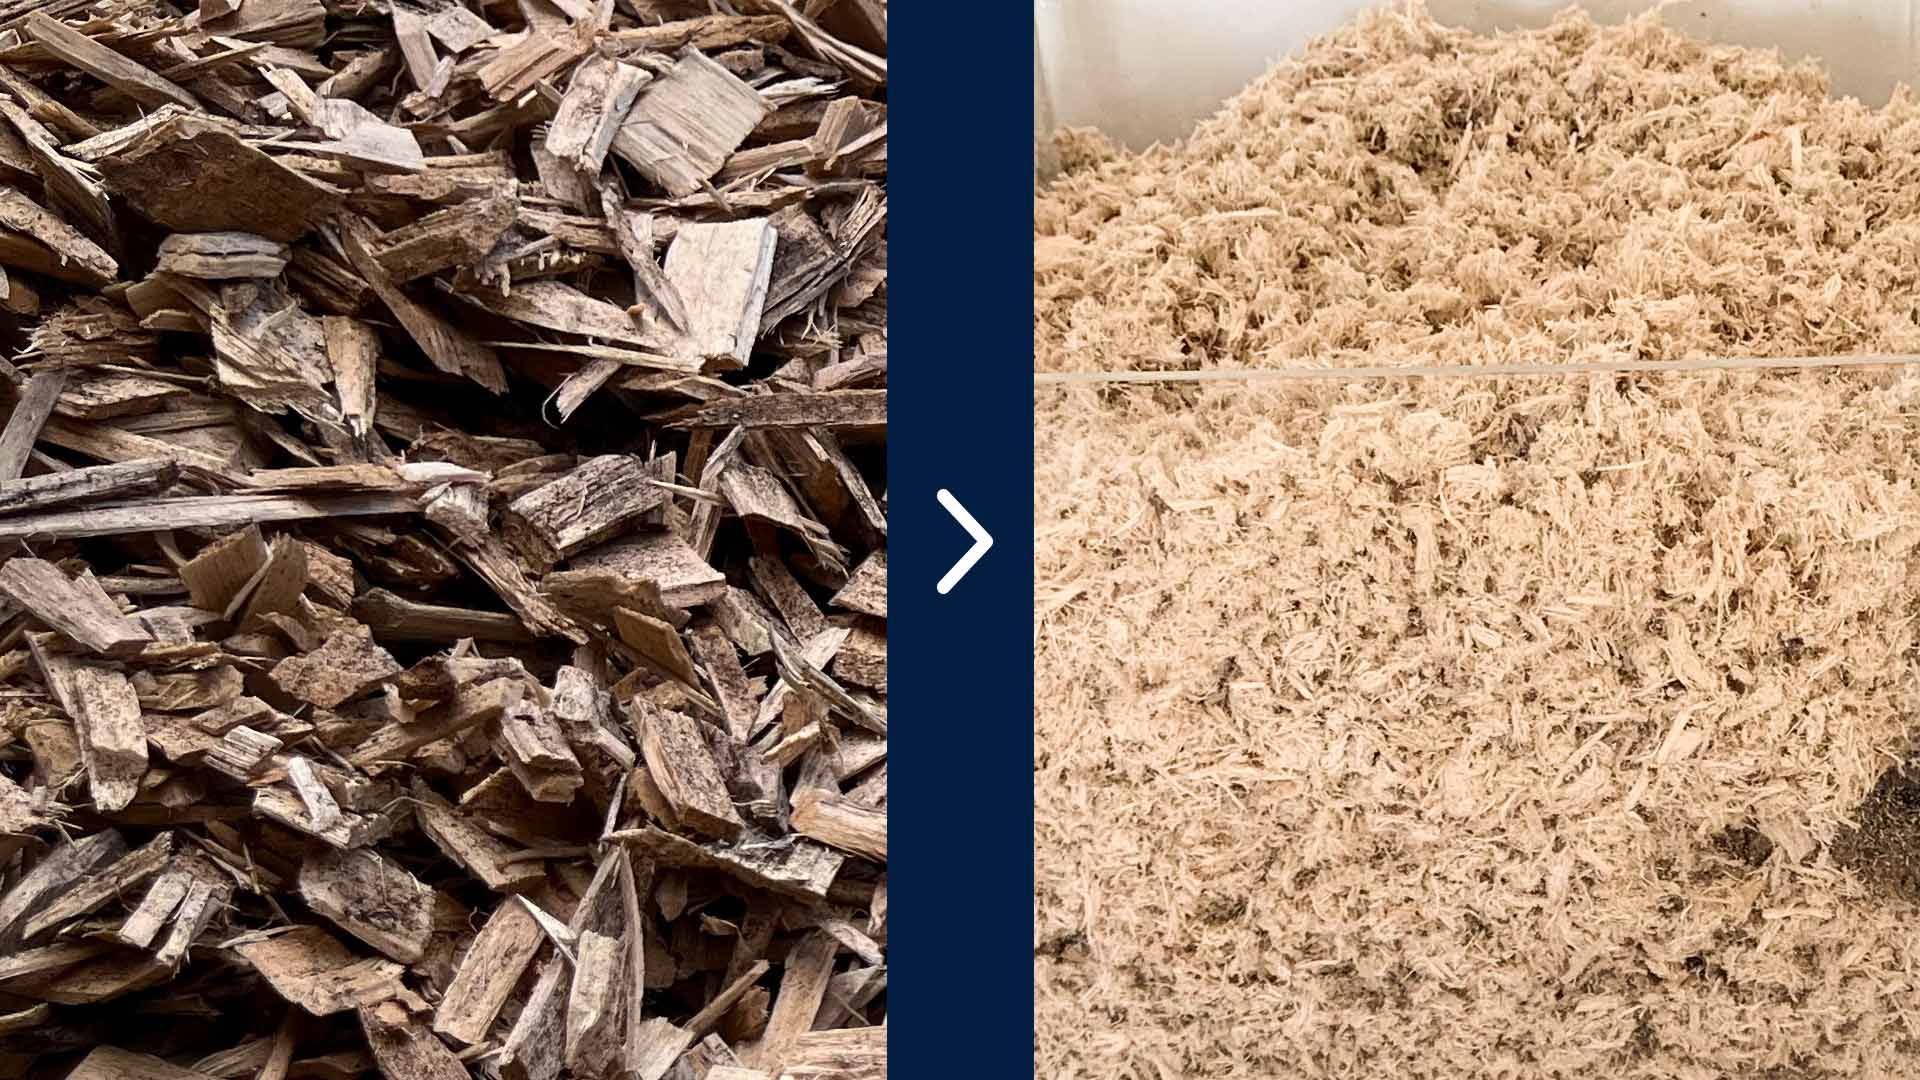 The outcome of the processing of white softwood chips using the wood fiber machine